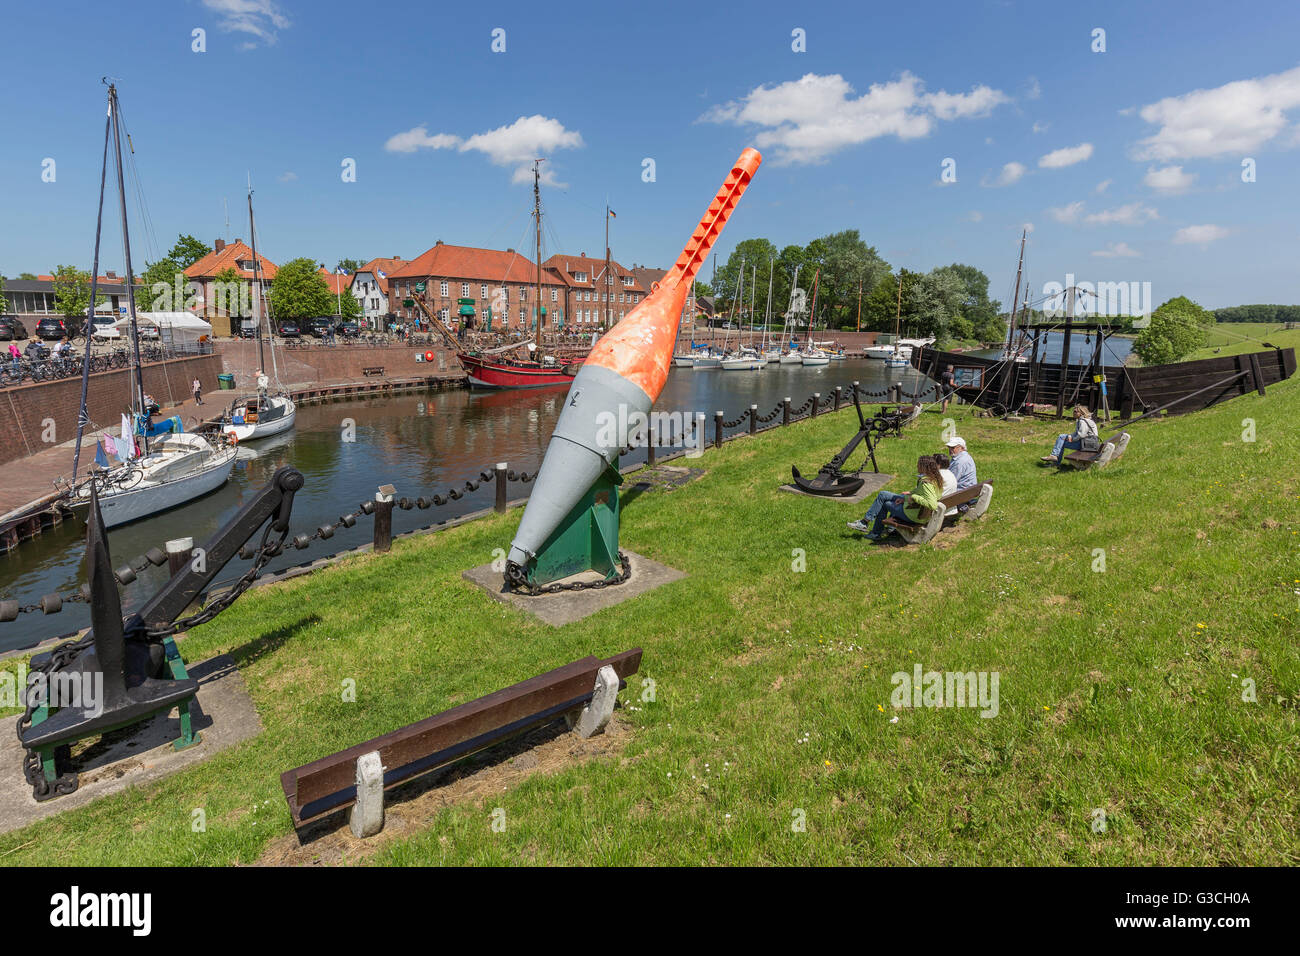 At the historic 'Old Harbour' of Hooksiel, district of the municipality Wangerland, district of Friesland, Stock Photo